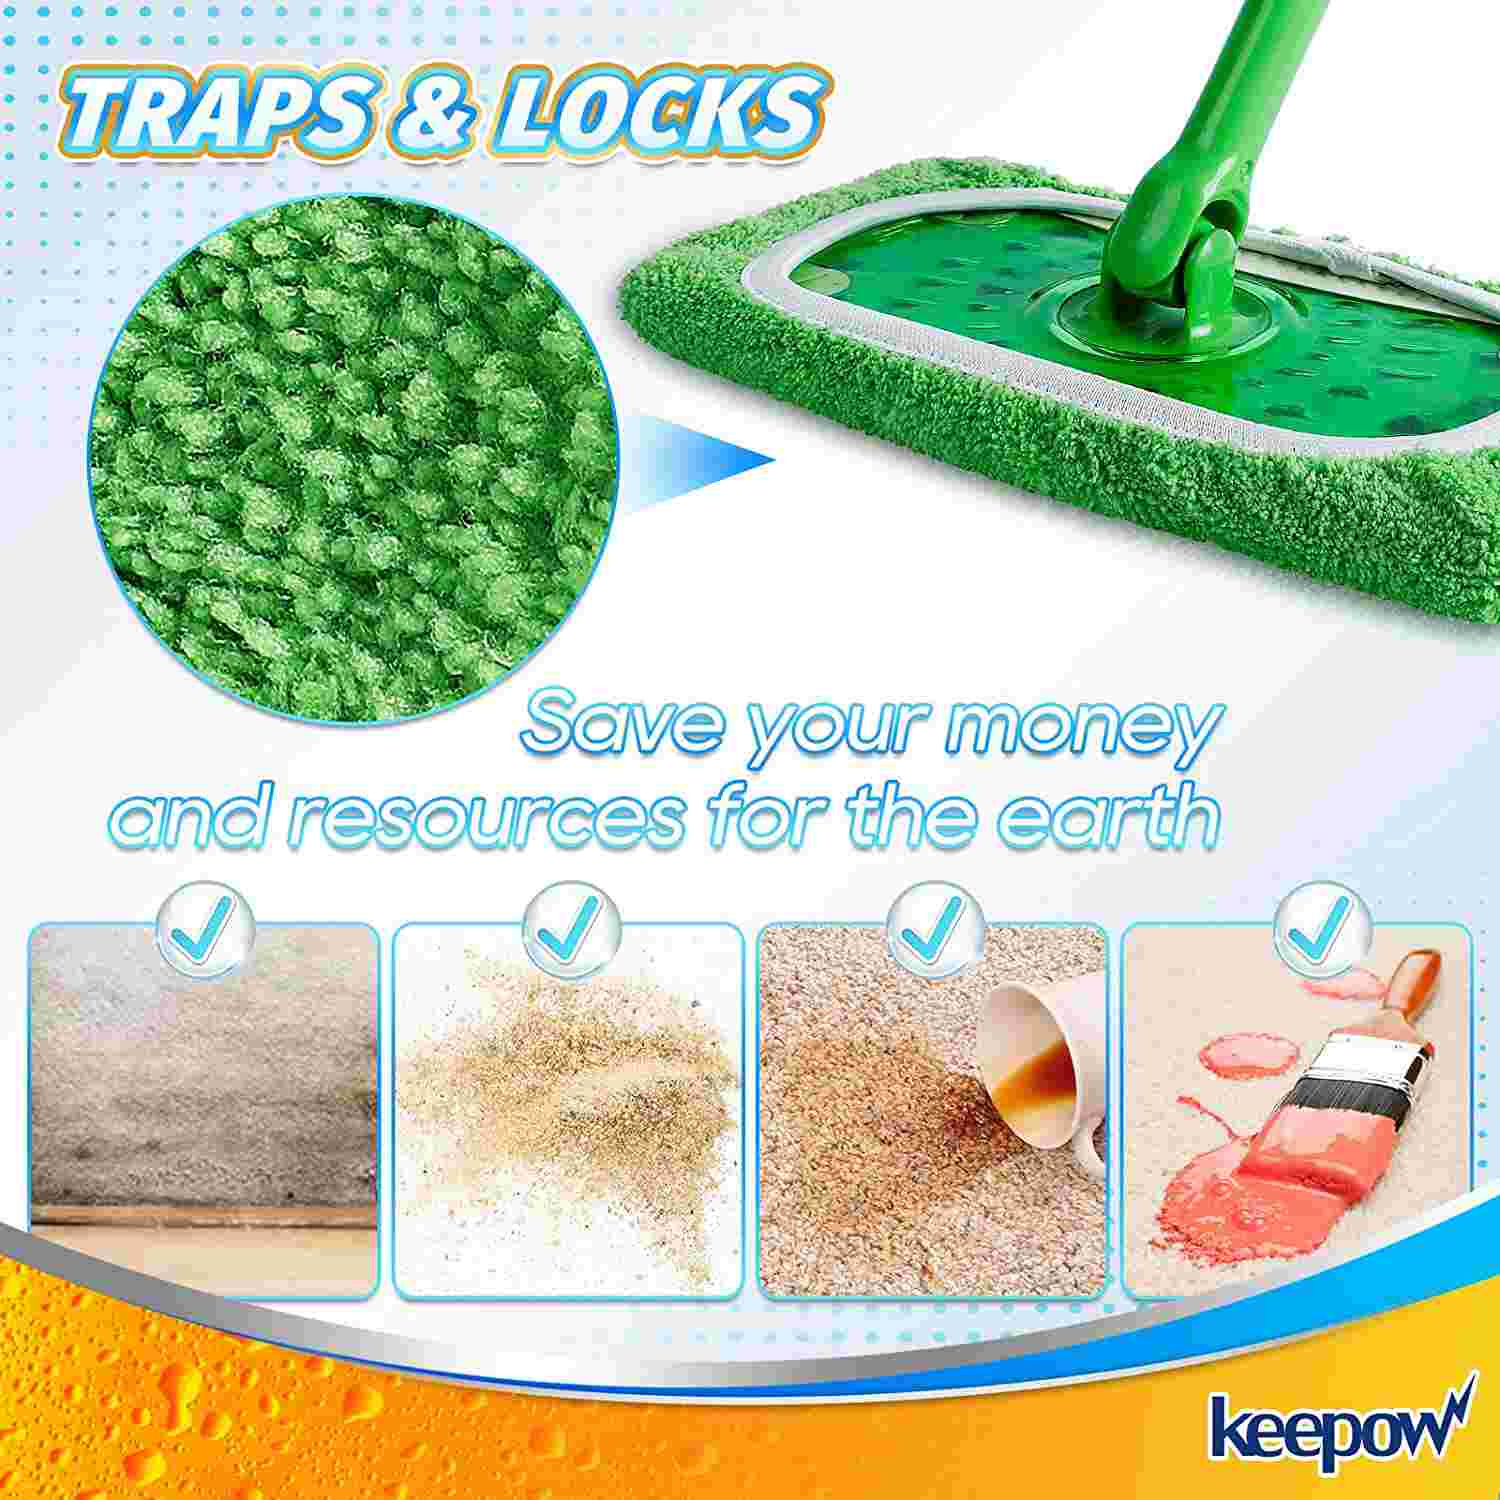 KEEPOW Dry Sweeping Cloths, Washable Microfiber Wet Mopping Cloth Refills for Surface/Hardwood Floor Cleaning